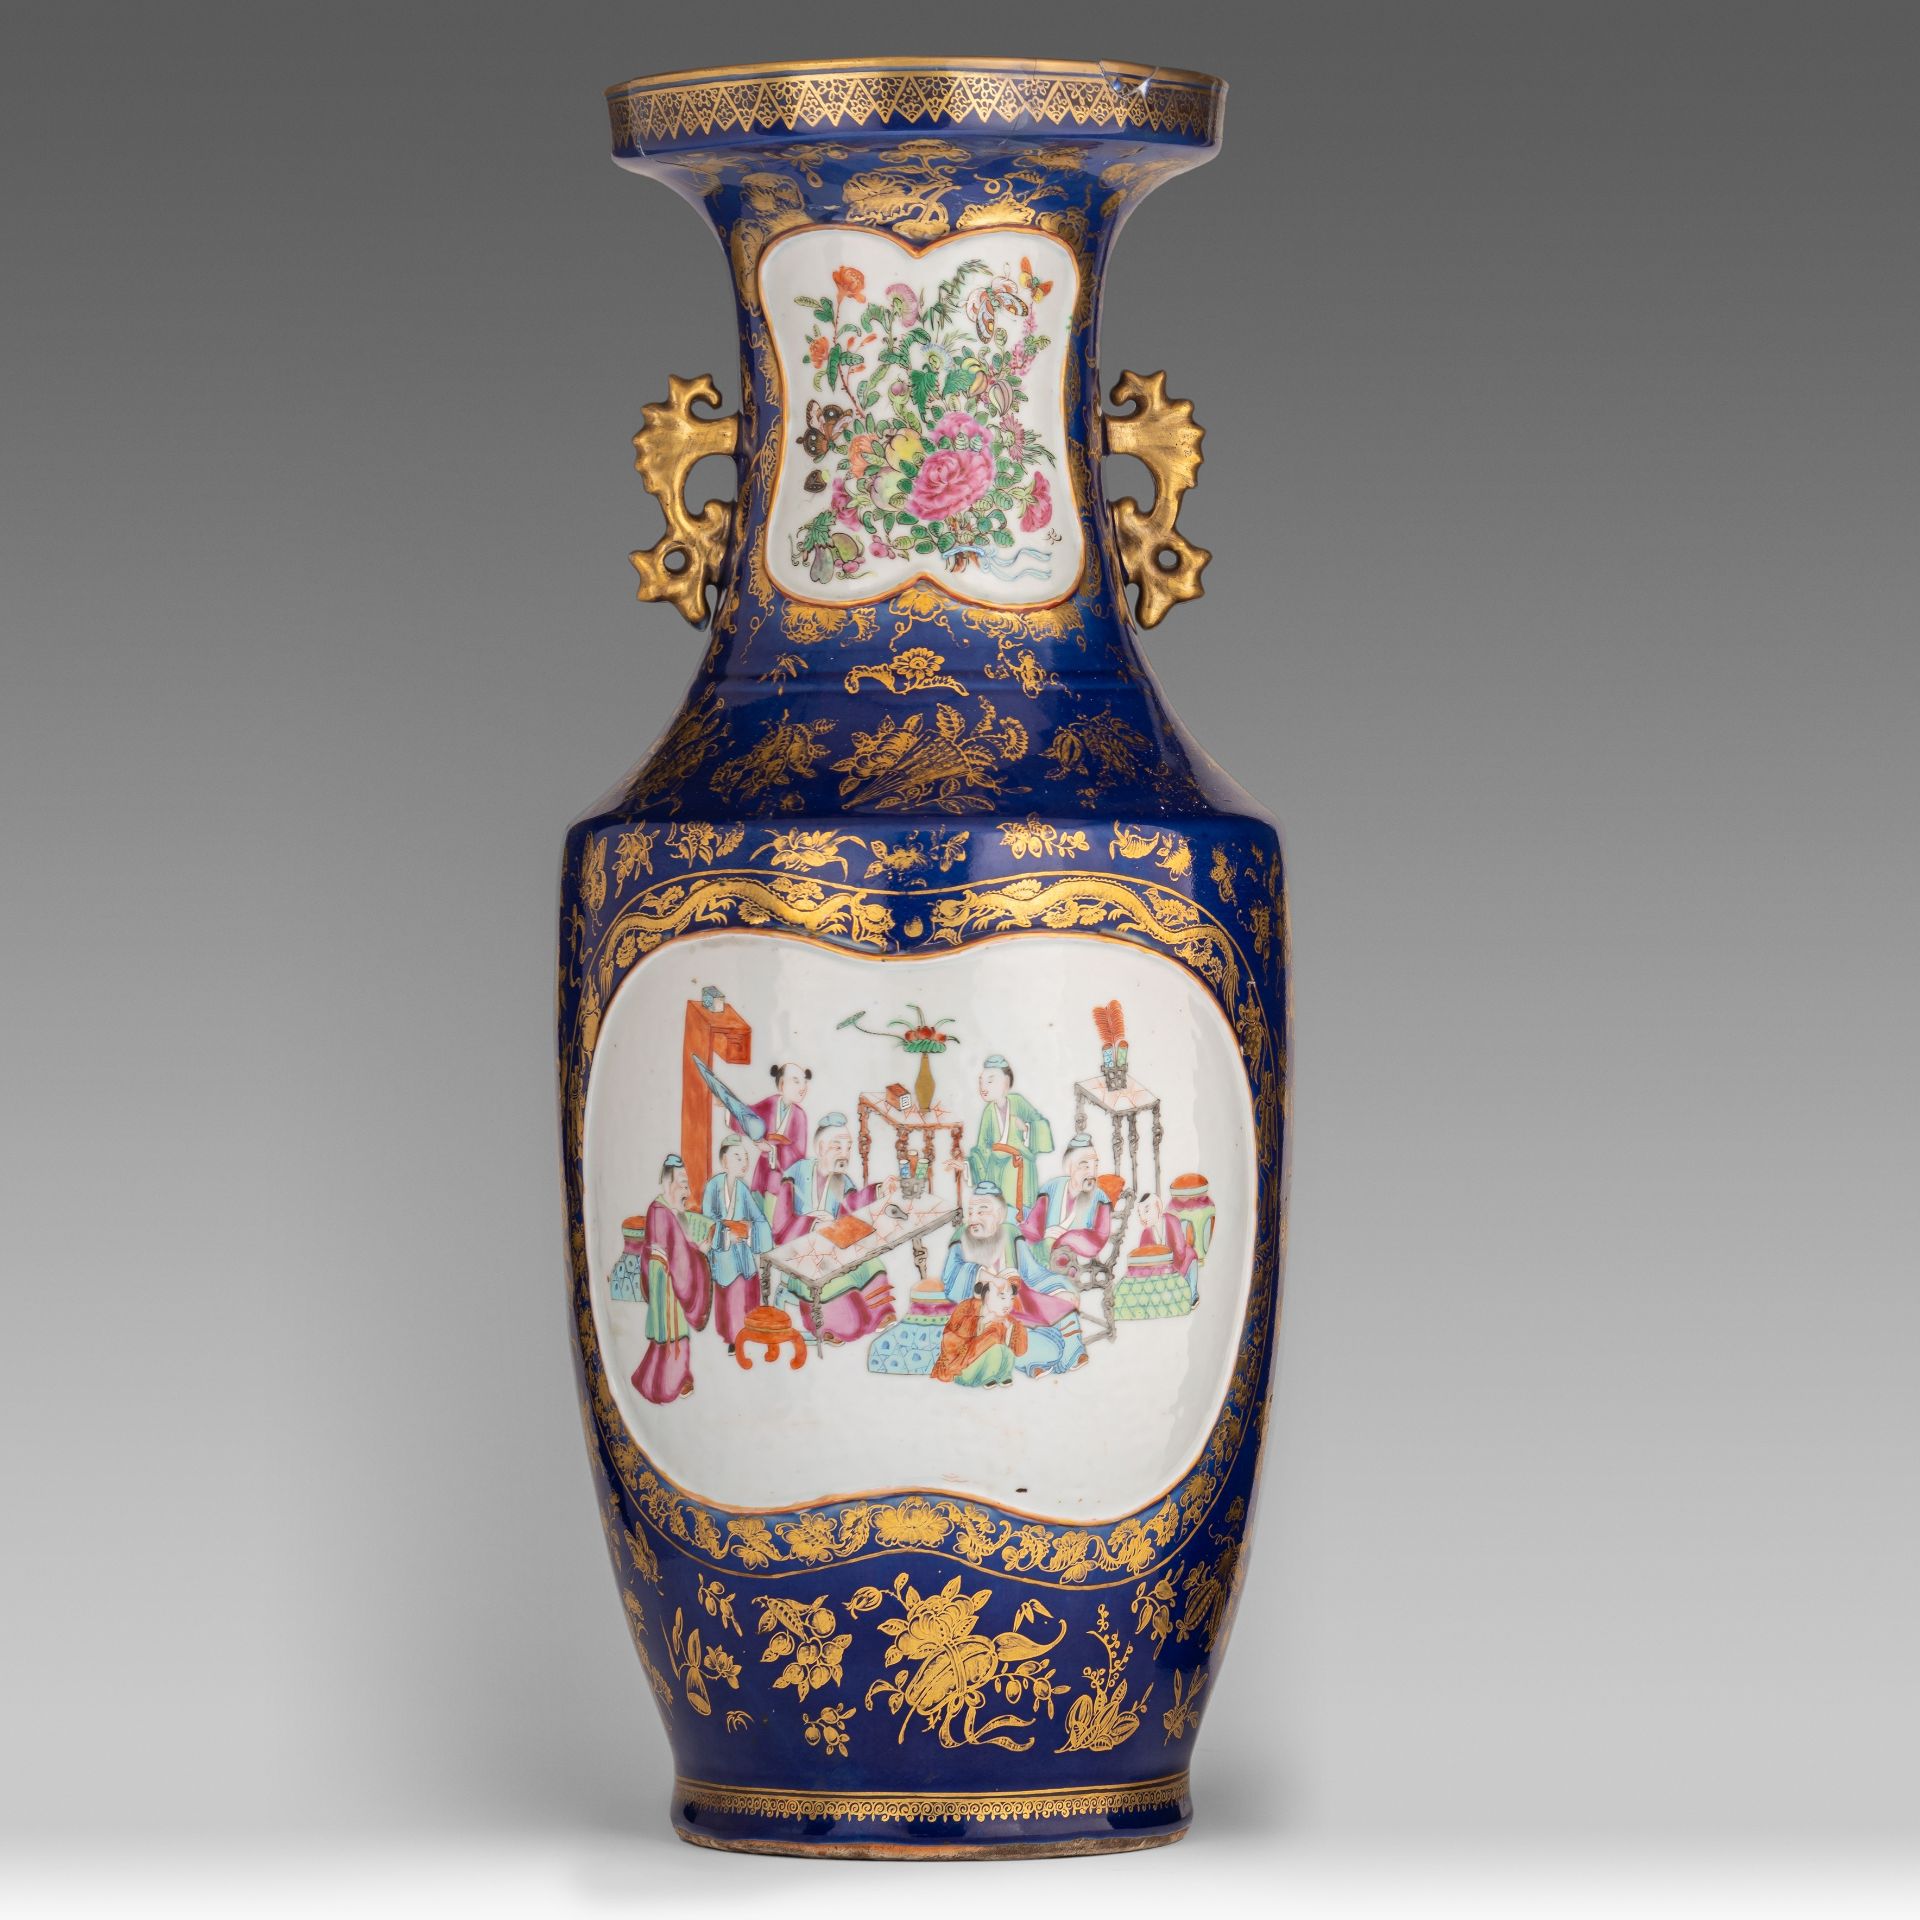 A Chinese Canton famille rose and gilt on blue ground vase, paired with dragon handles, 19thC, H 60